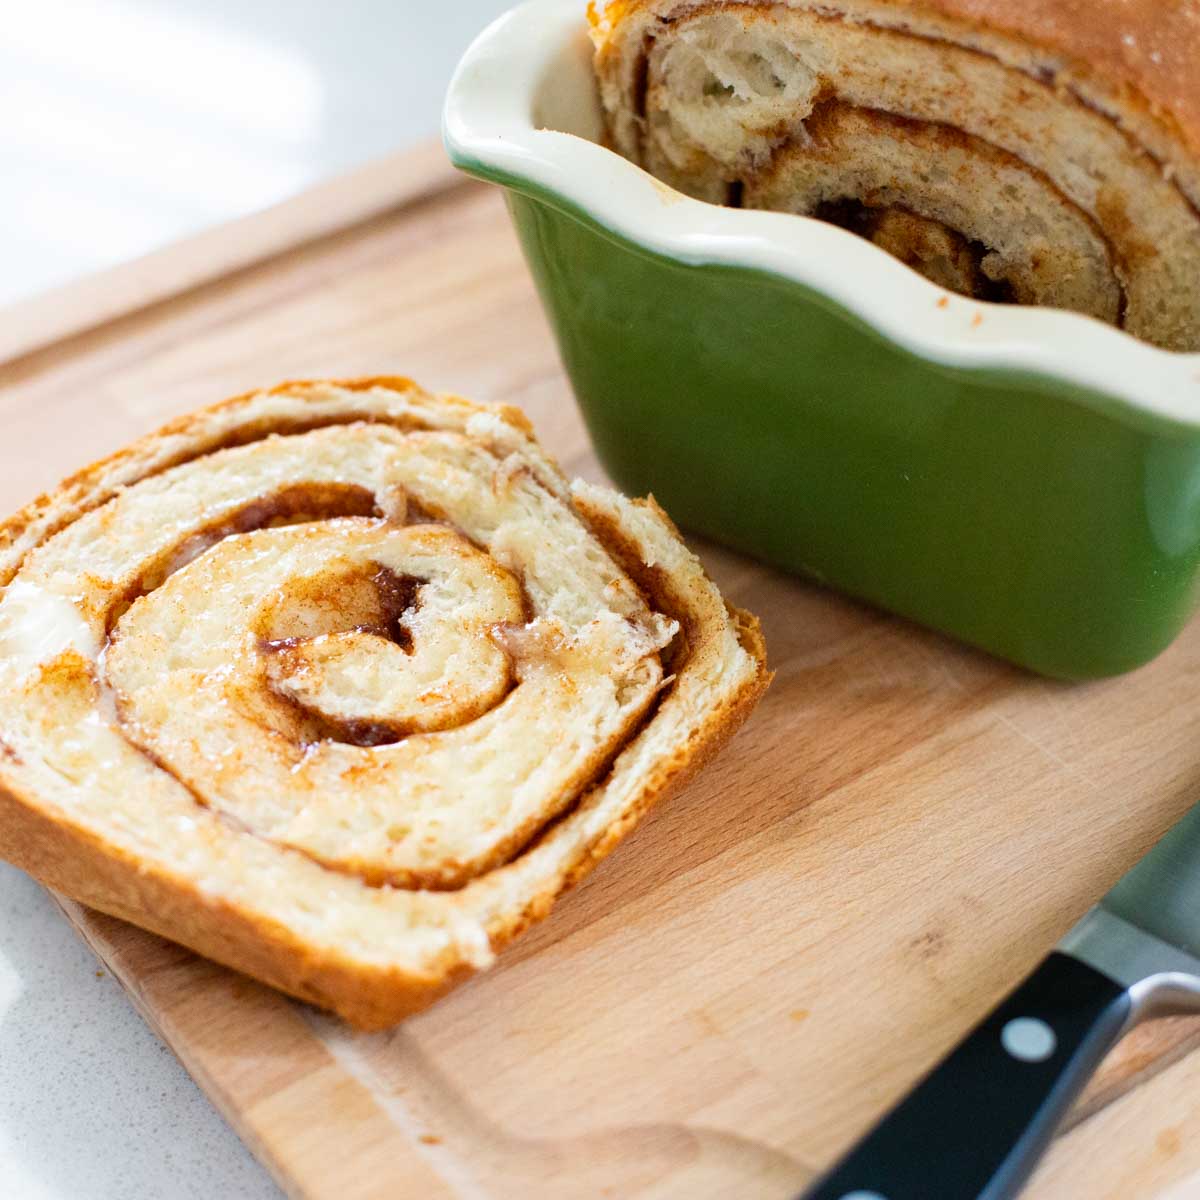 A slice of cinnamon swirl bread sits on a cutting board next to the bread pan it came from.